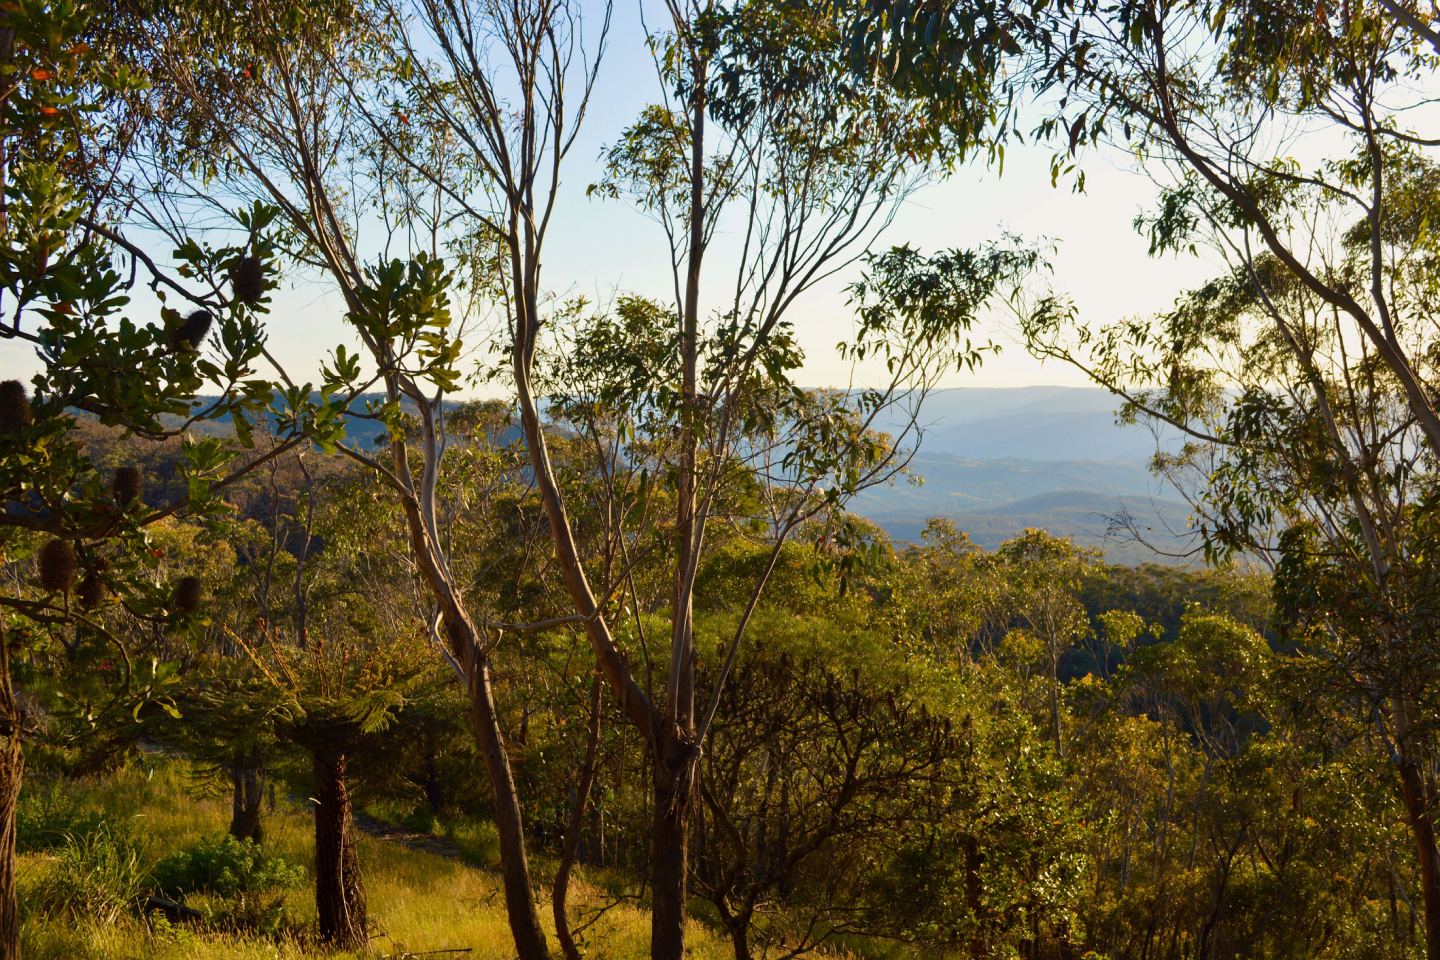 View of the bush in a mountainous region of Australia which the Environmental Defenders Office works to protect